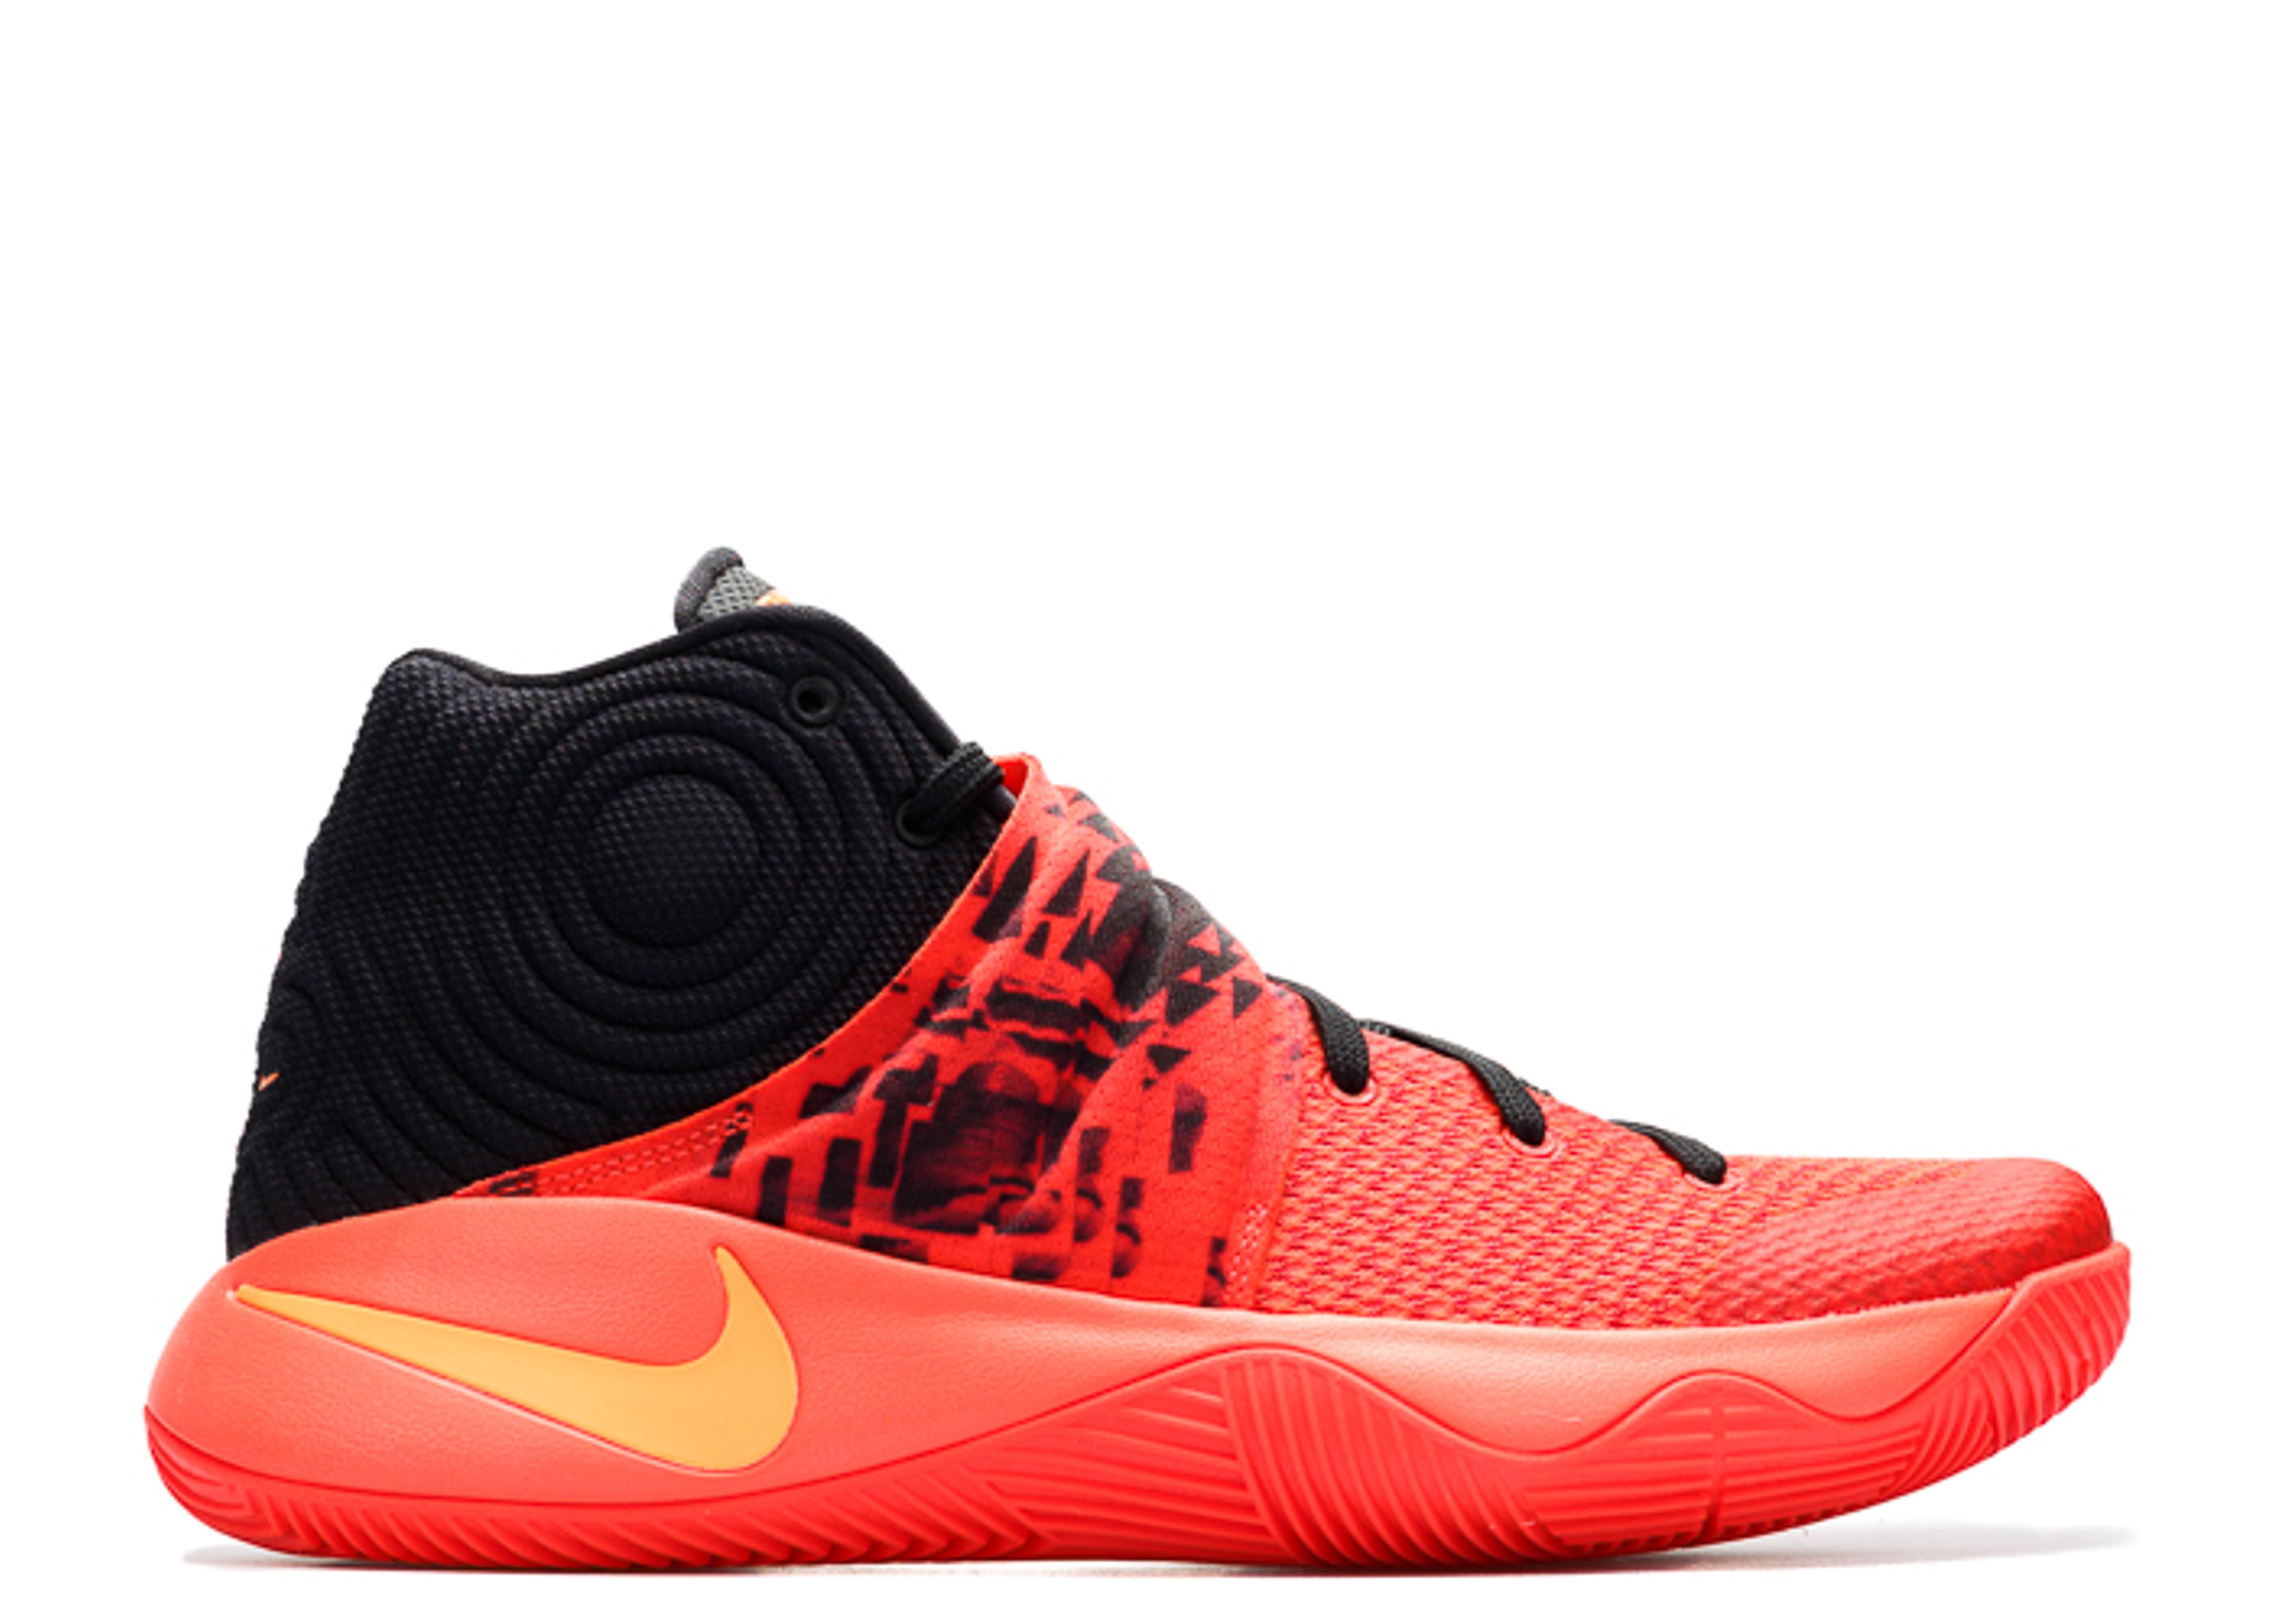 kyrie inferno 2 Cheaper Than Retail Price\u003e Buy Clothing, Accessories and  lifestyle products for women \u0026 men -